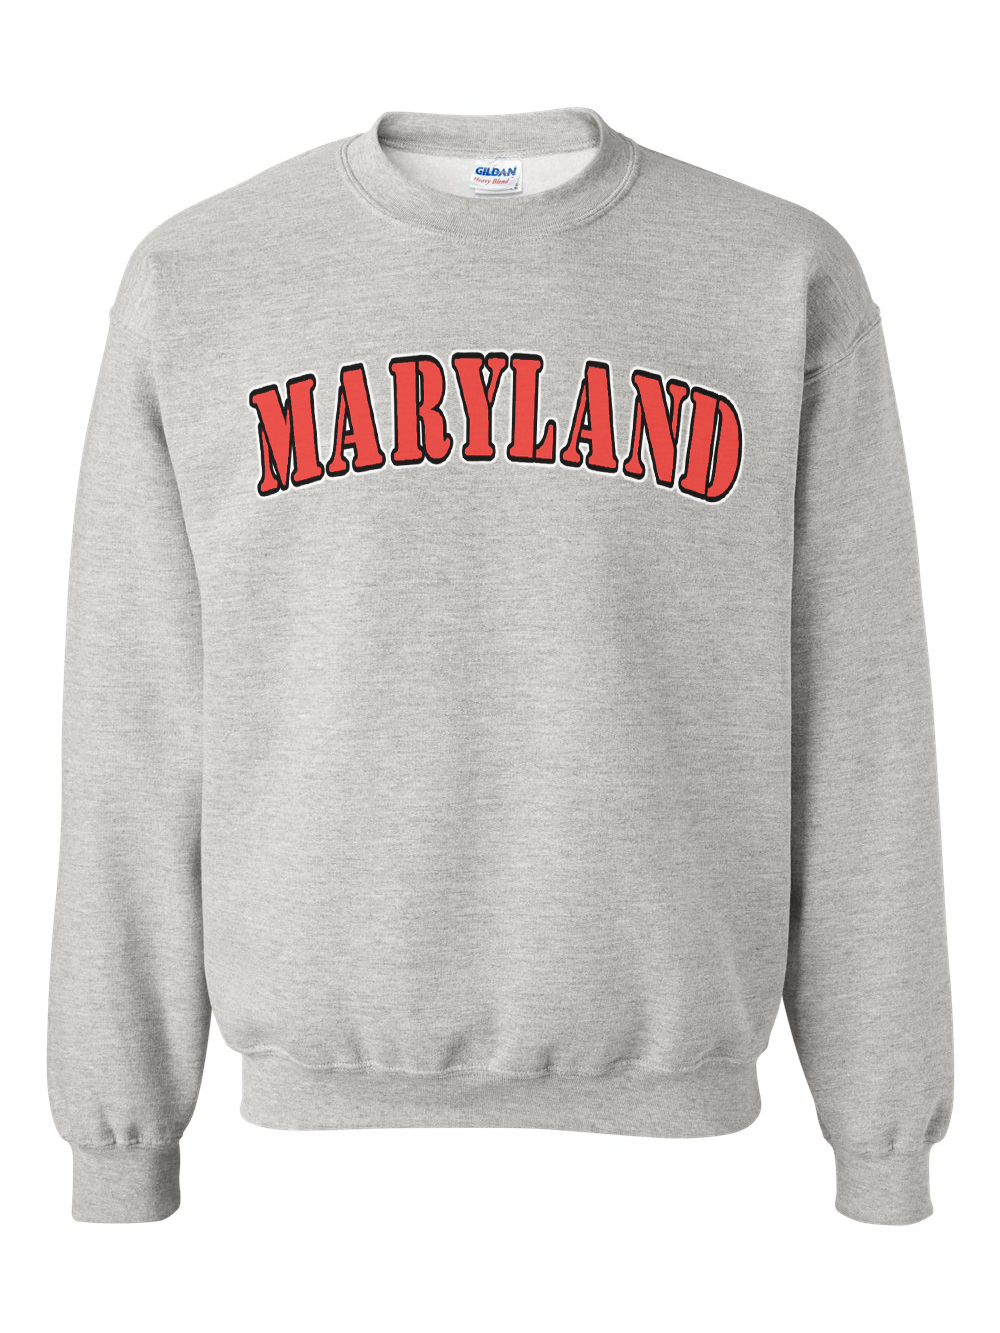 Maryland Gifts Red Plain Text Crewneck Sweater (Ash Grey)